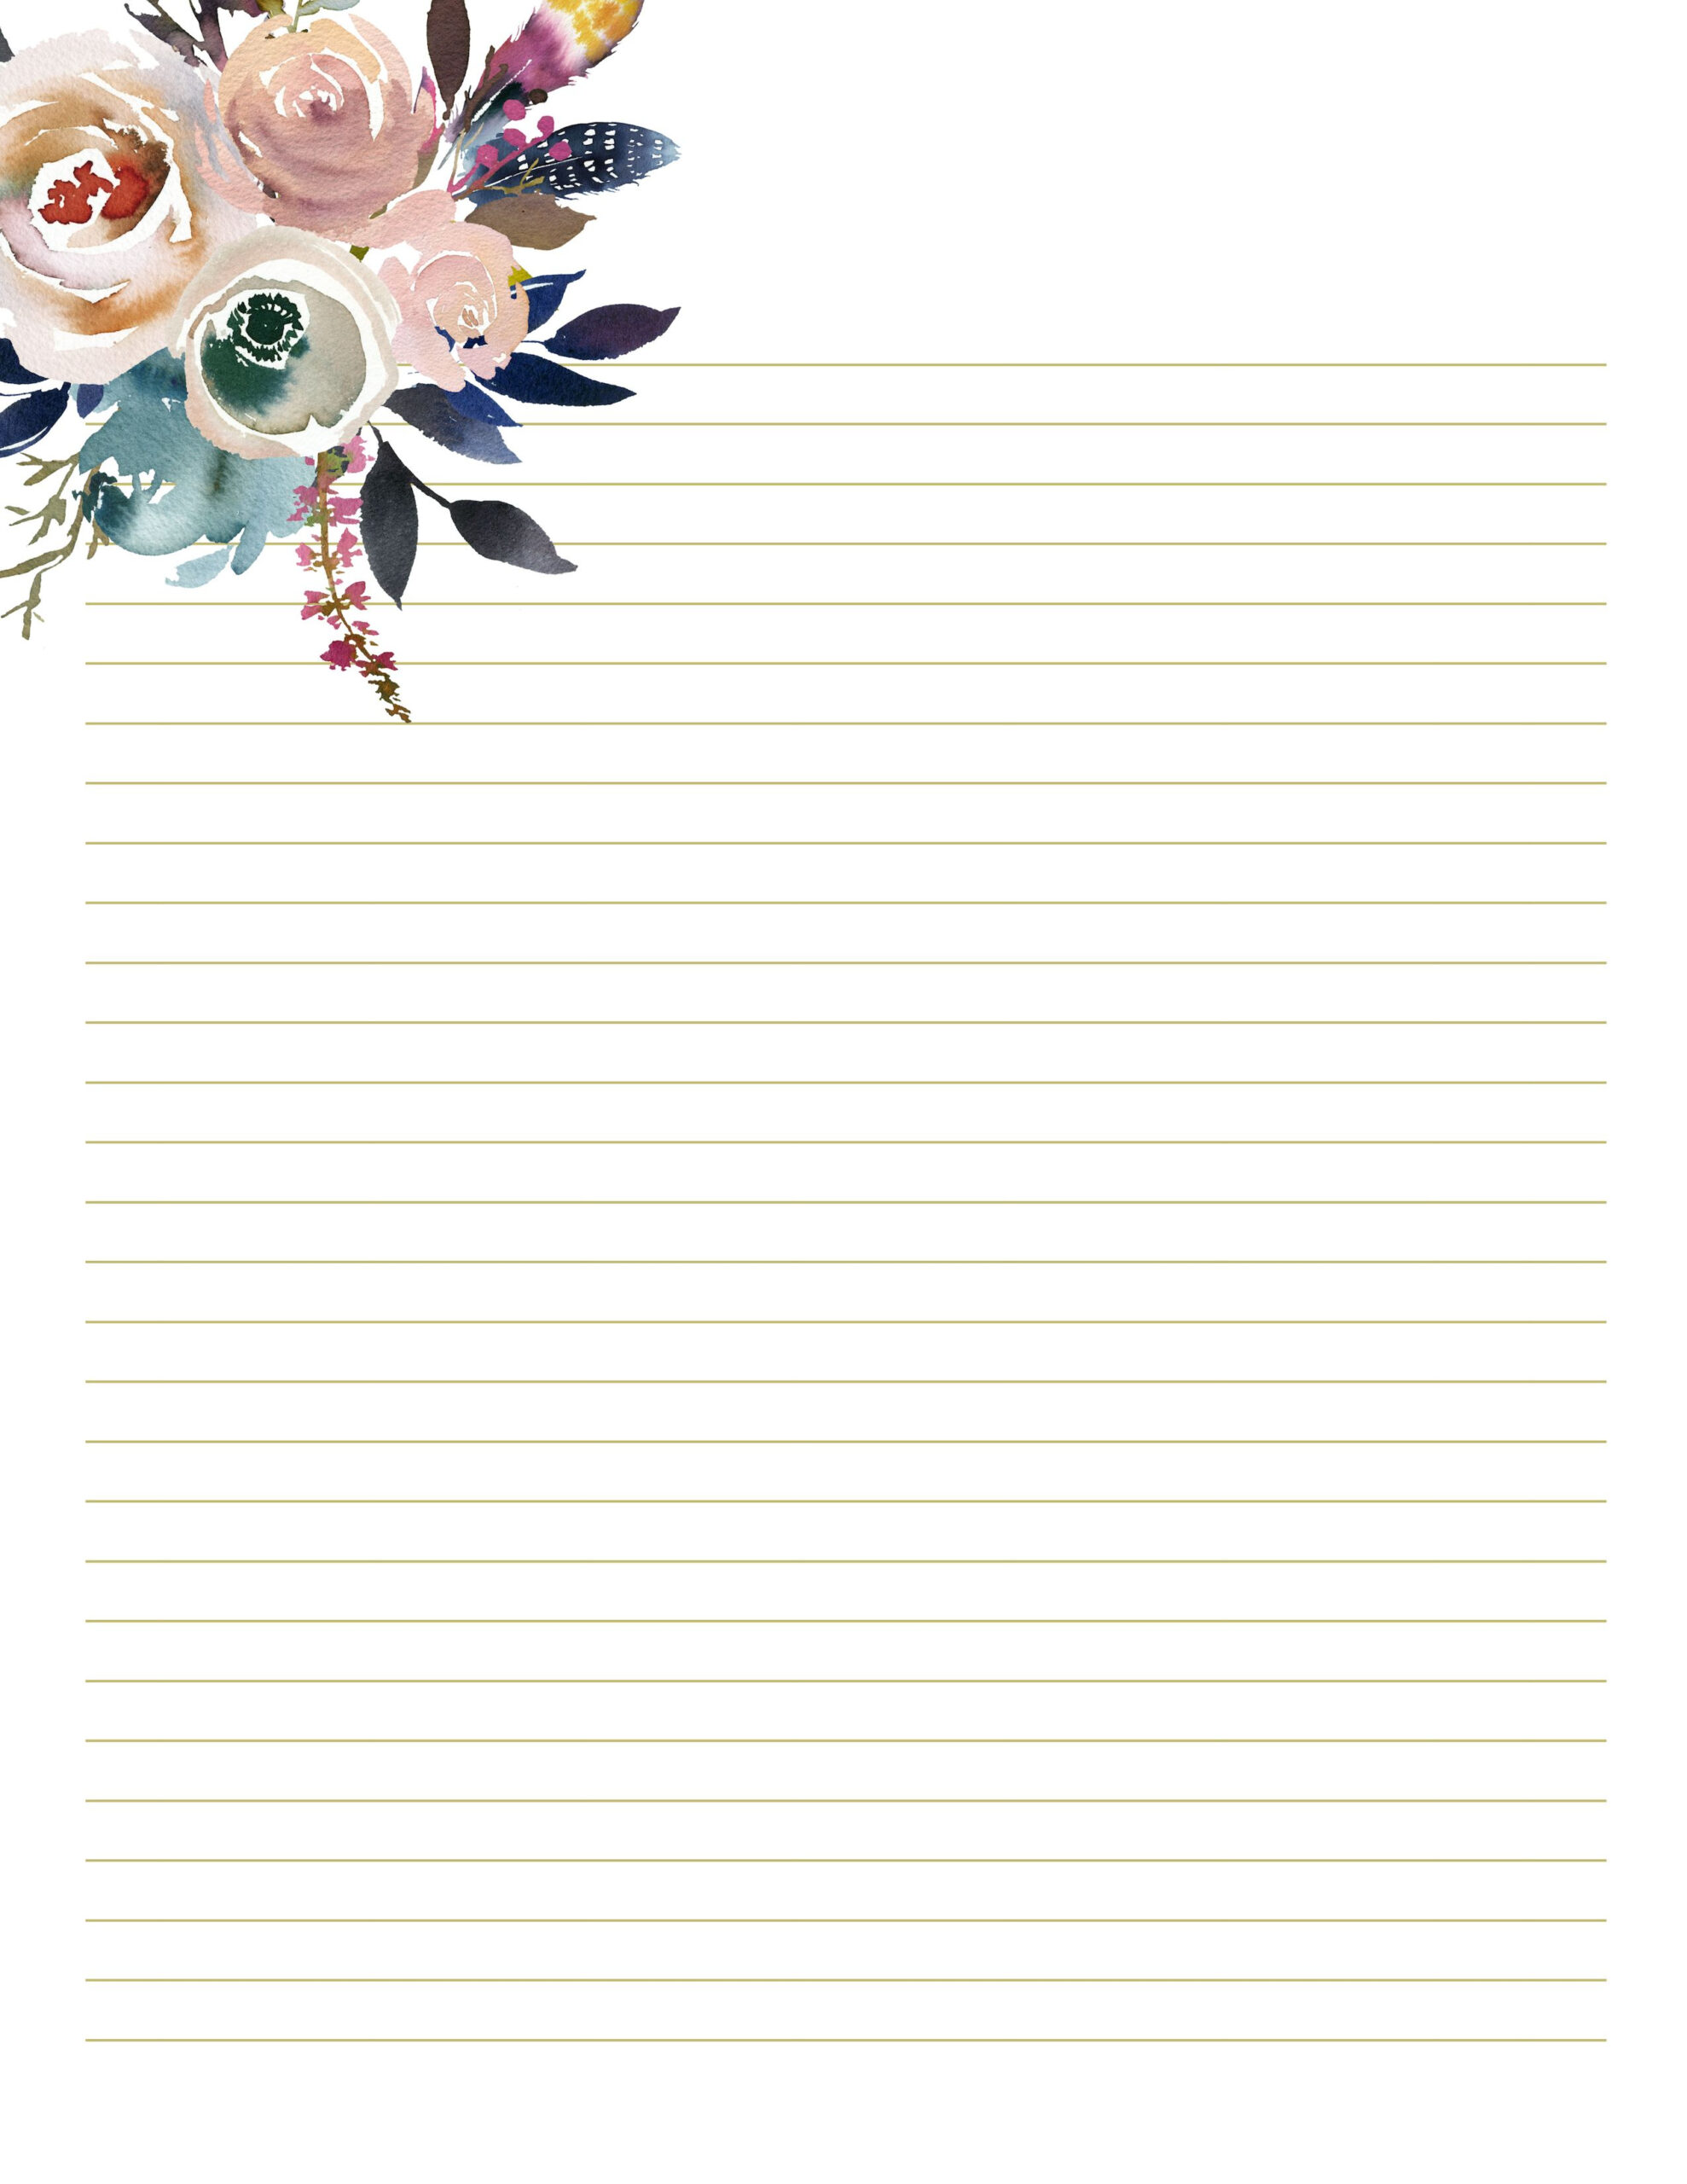 Floral Stationary For Wedding Writing Paper Printables Etsy Free 